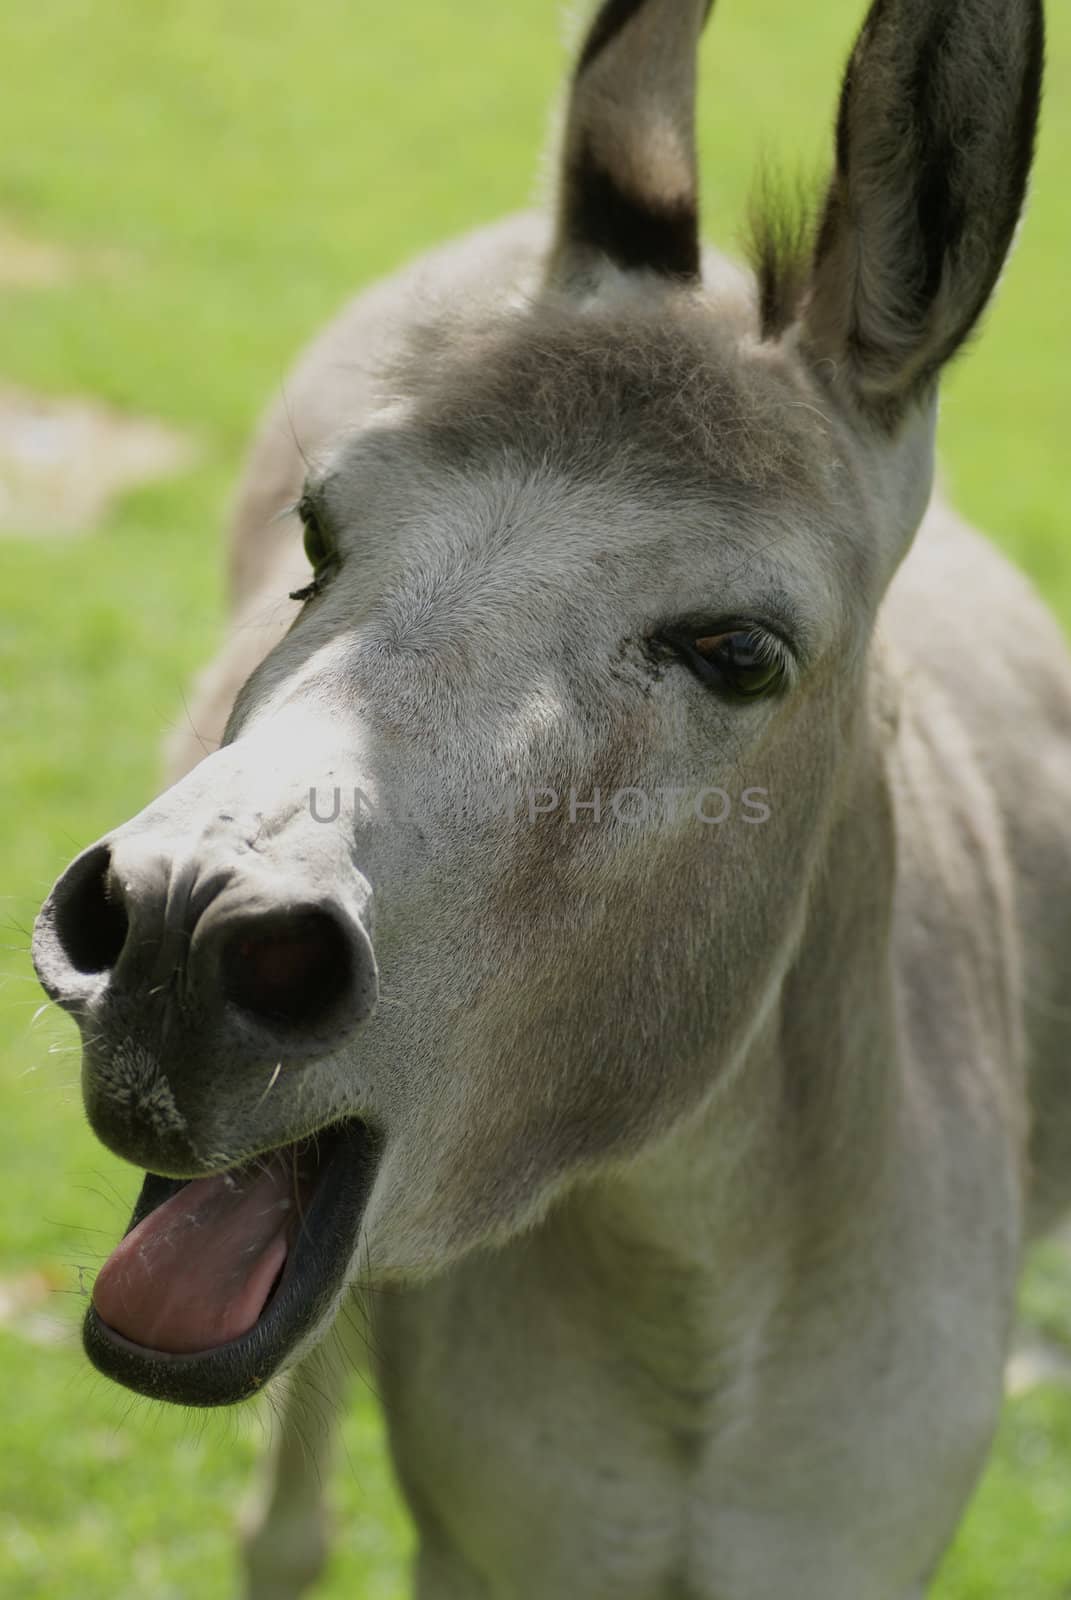 A bleating donkey making noise.